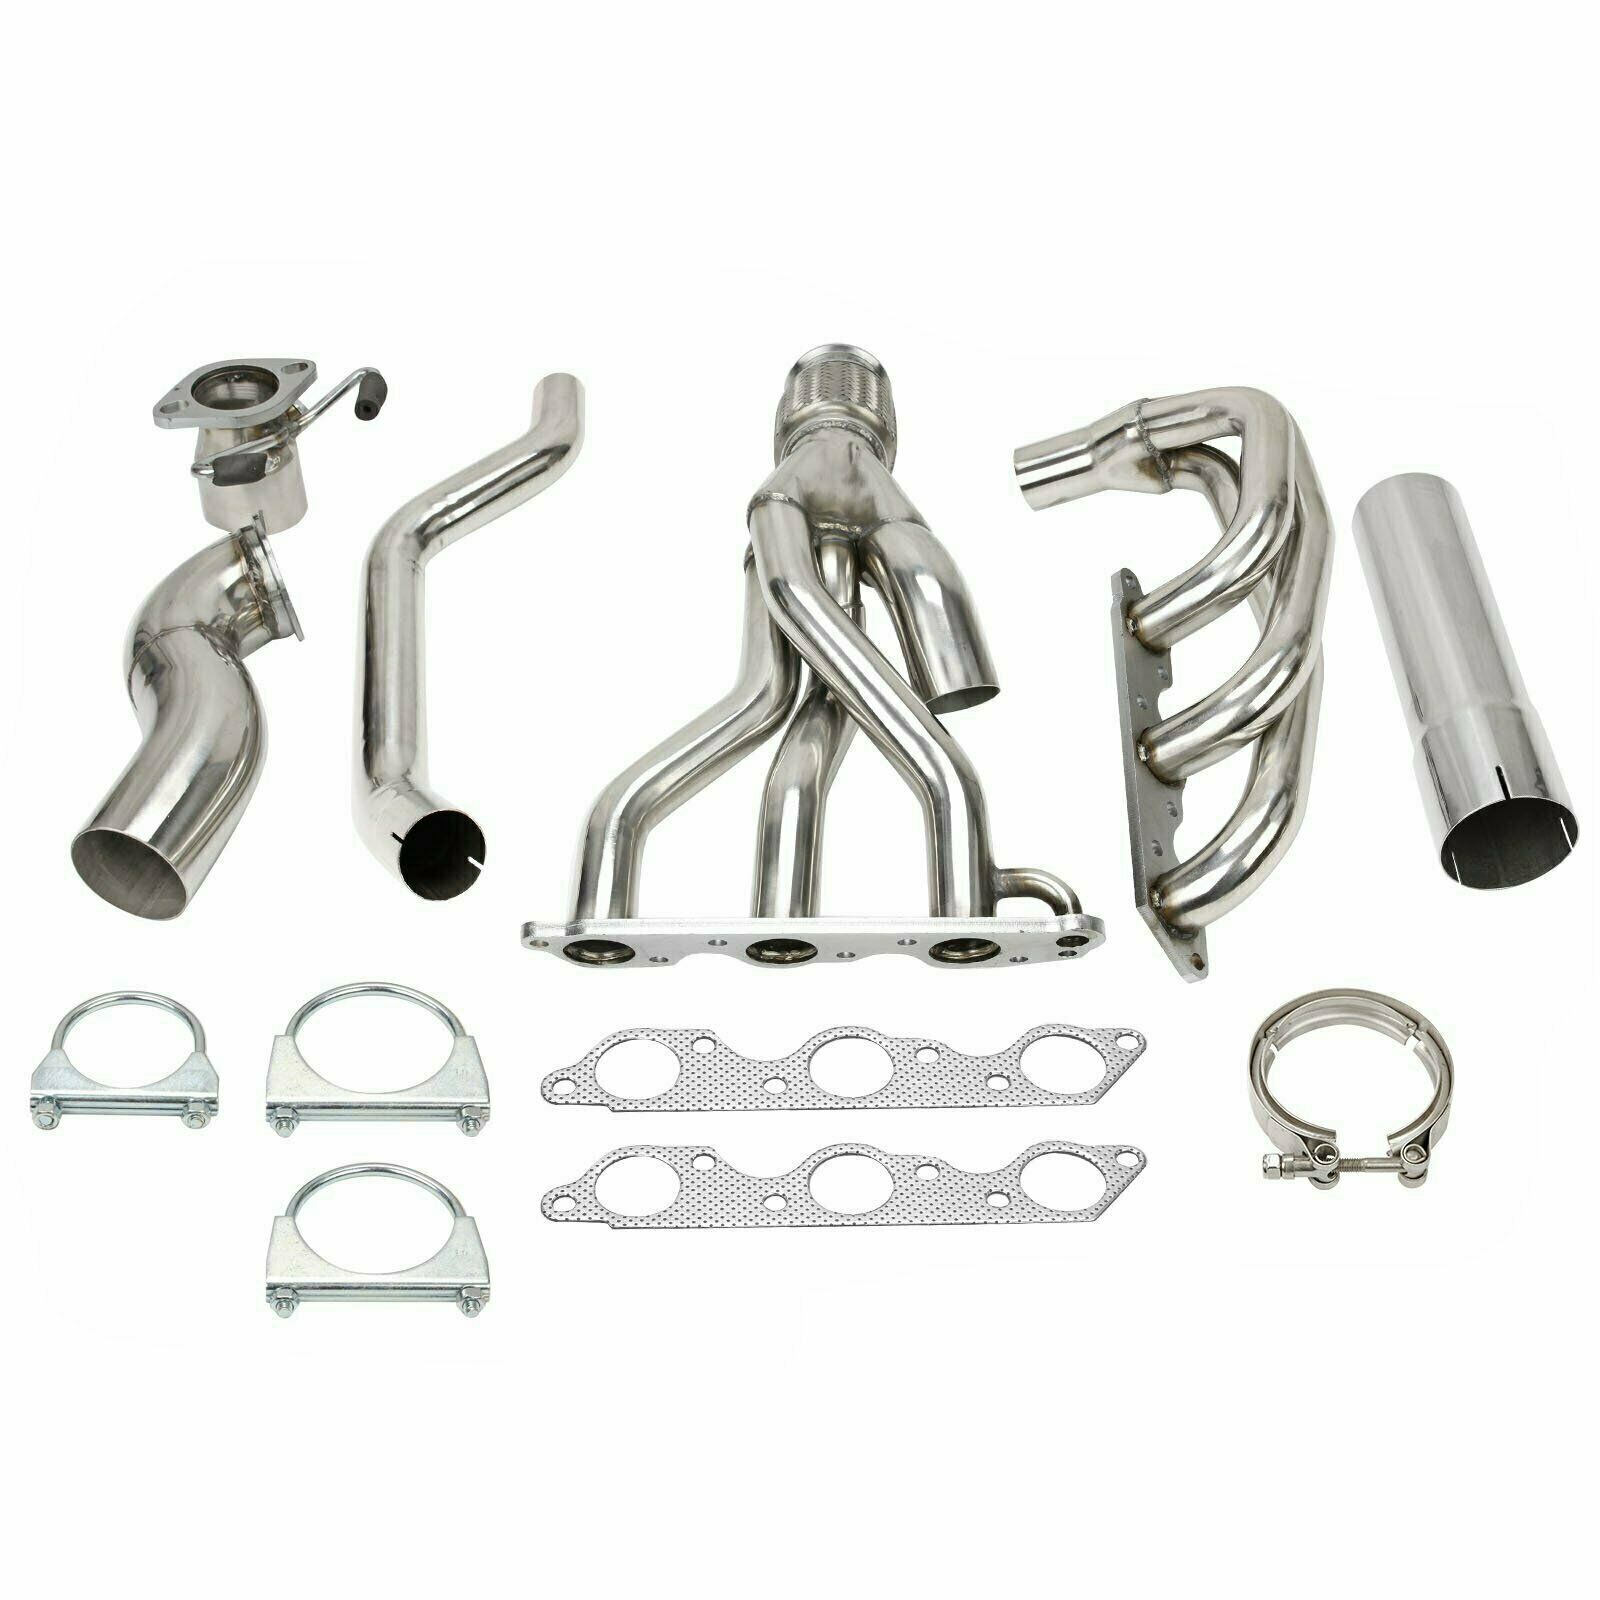 For Grand Prix /Gtp /Regal /Impala /Monte Carlo 3.8L Stainless Manifold Headers